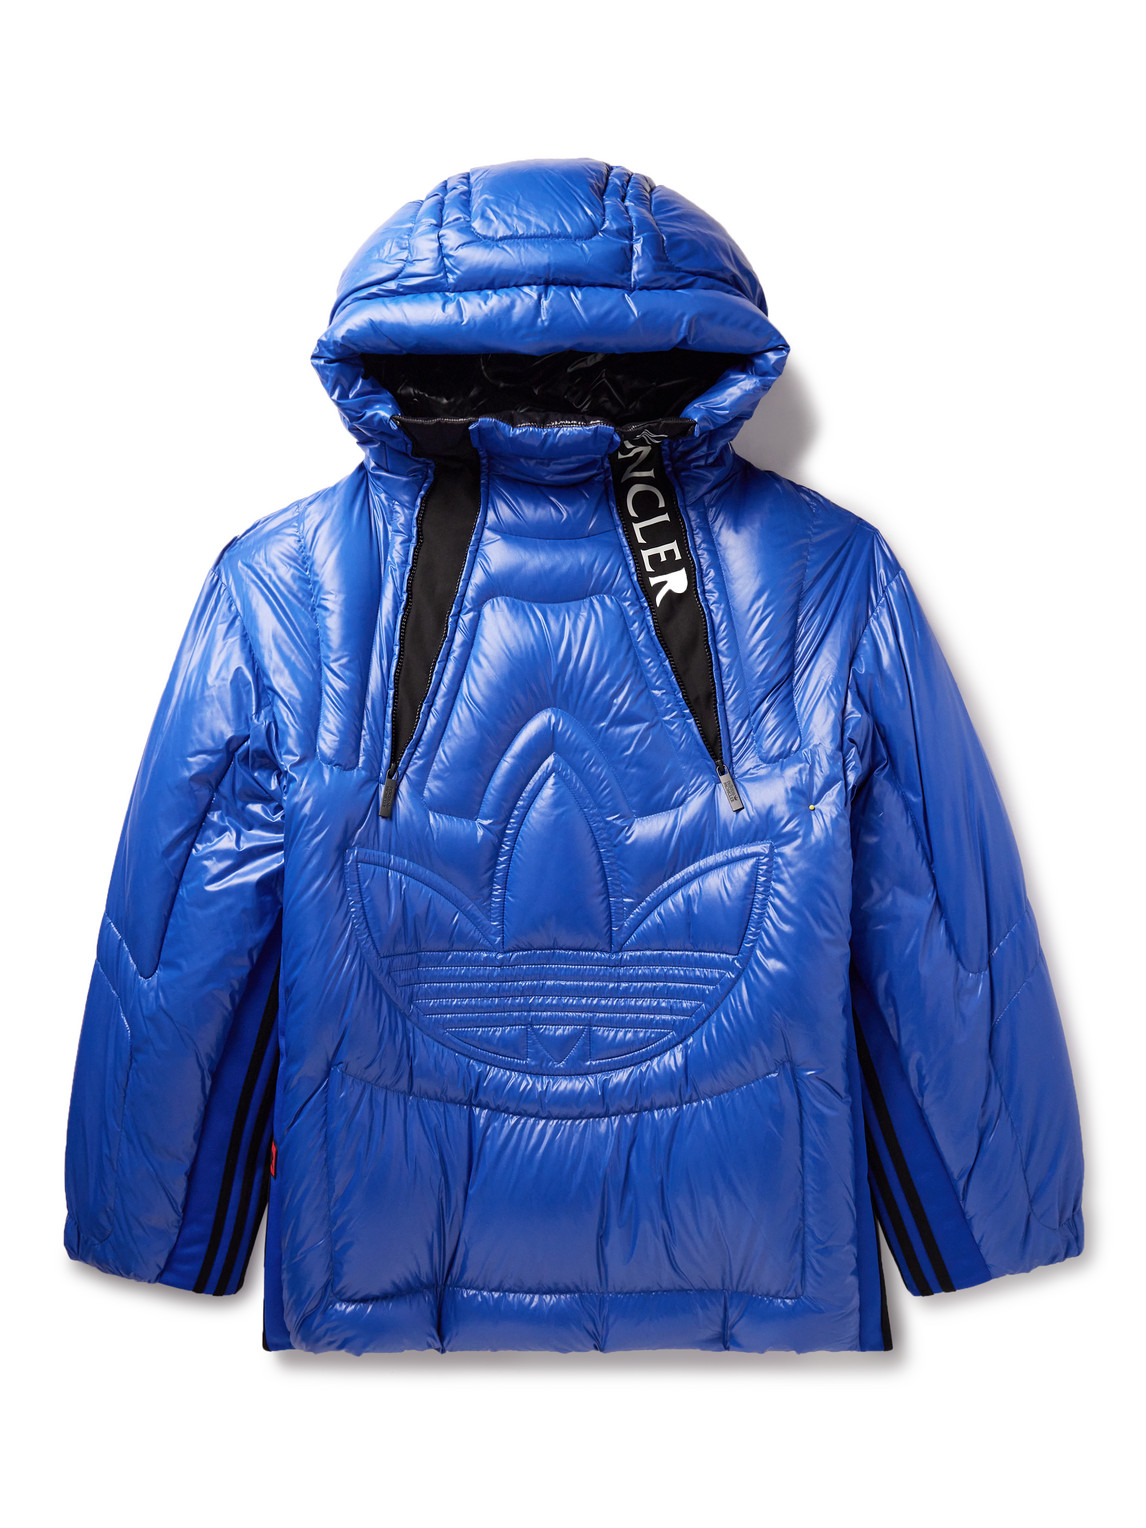 Moncler Genius X Adidas Chambery Jacket In 73b Blue